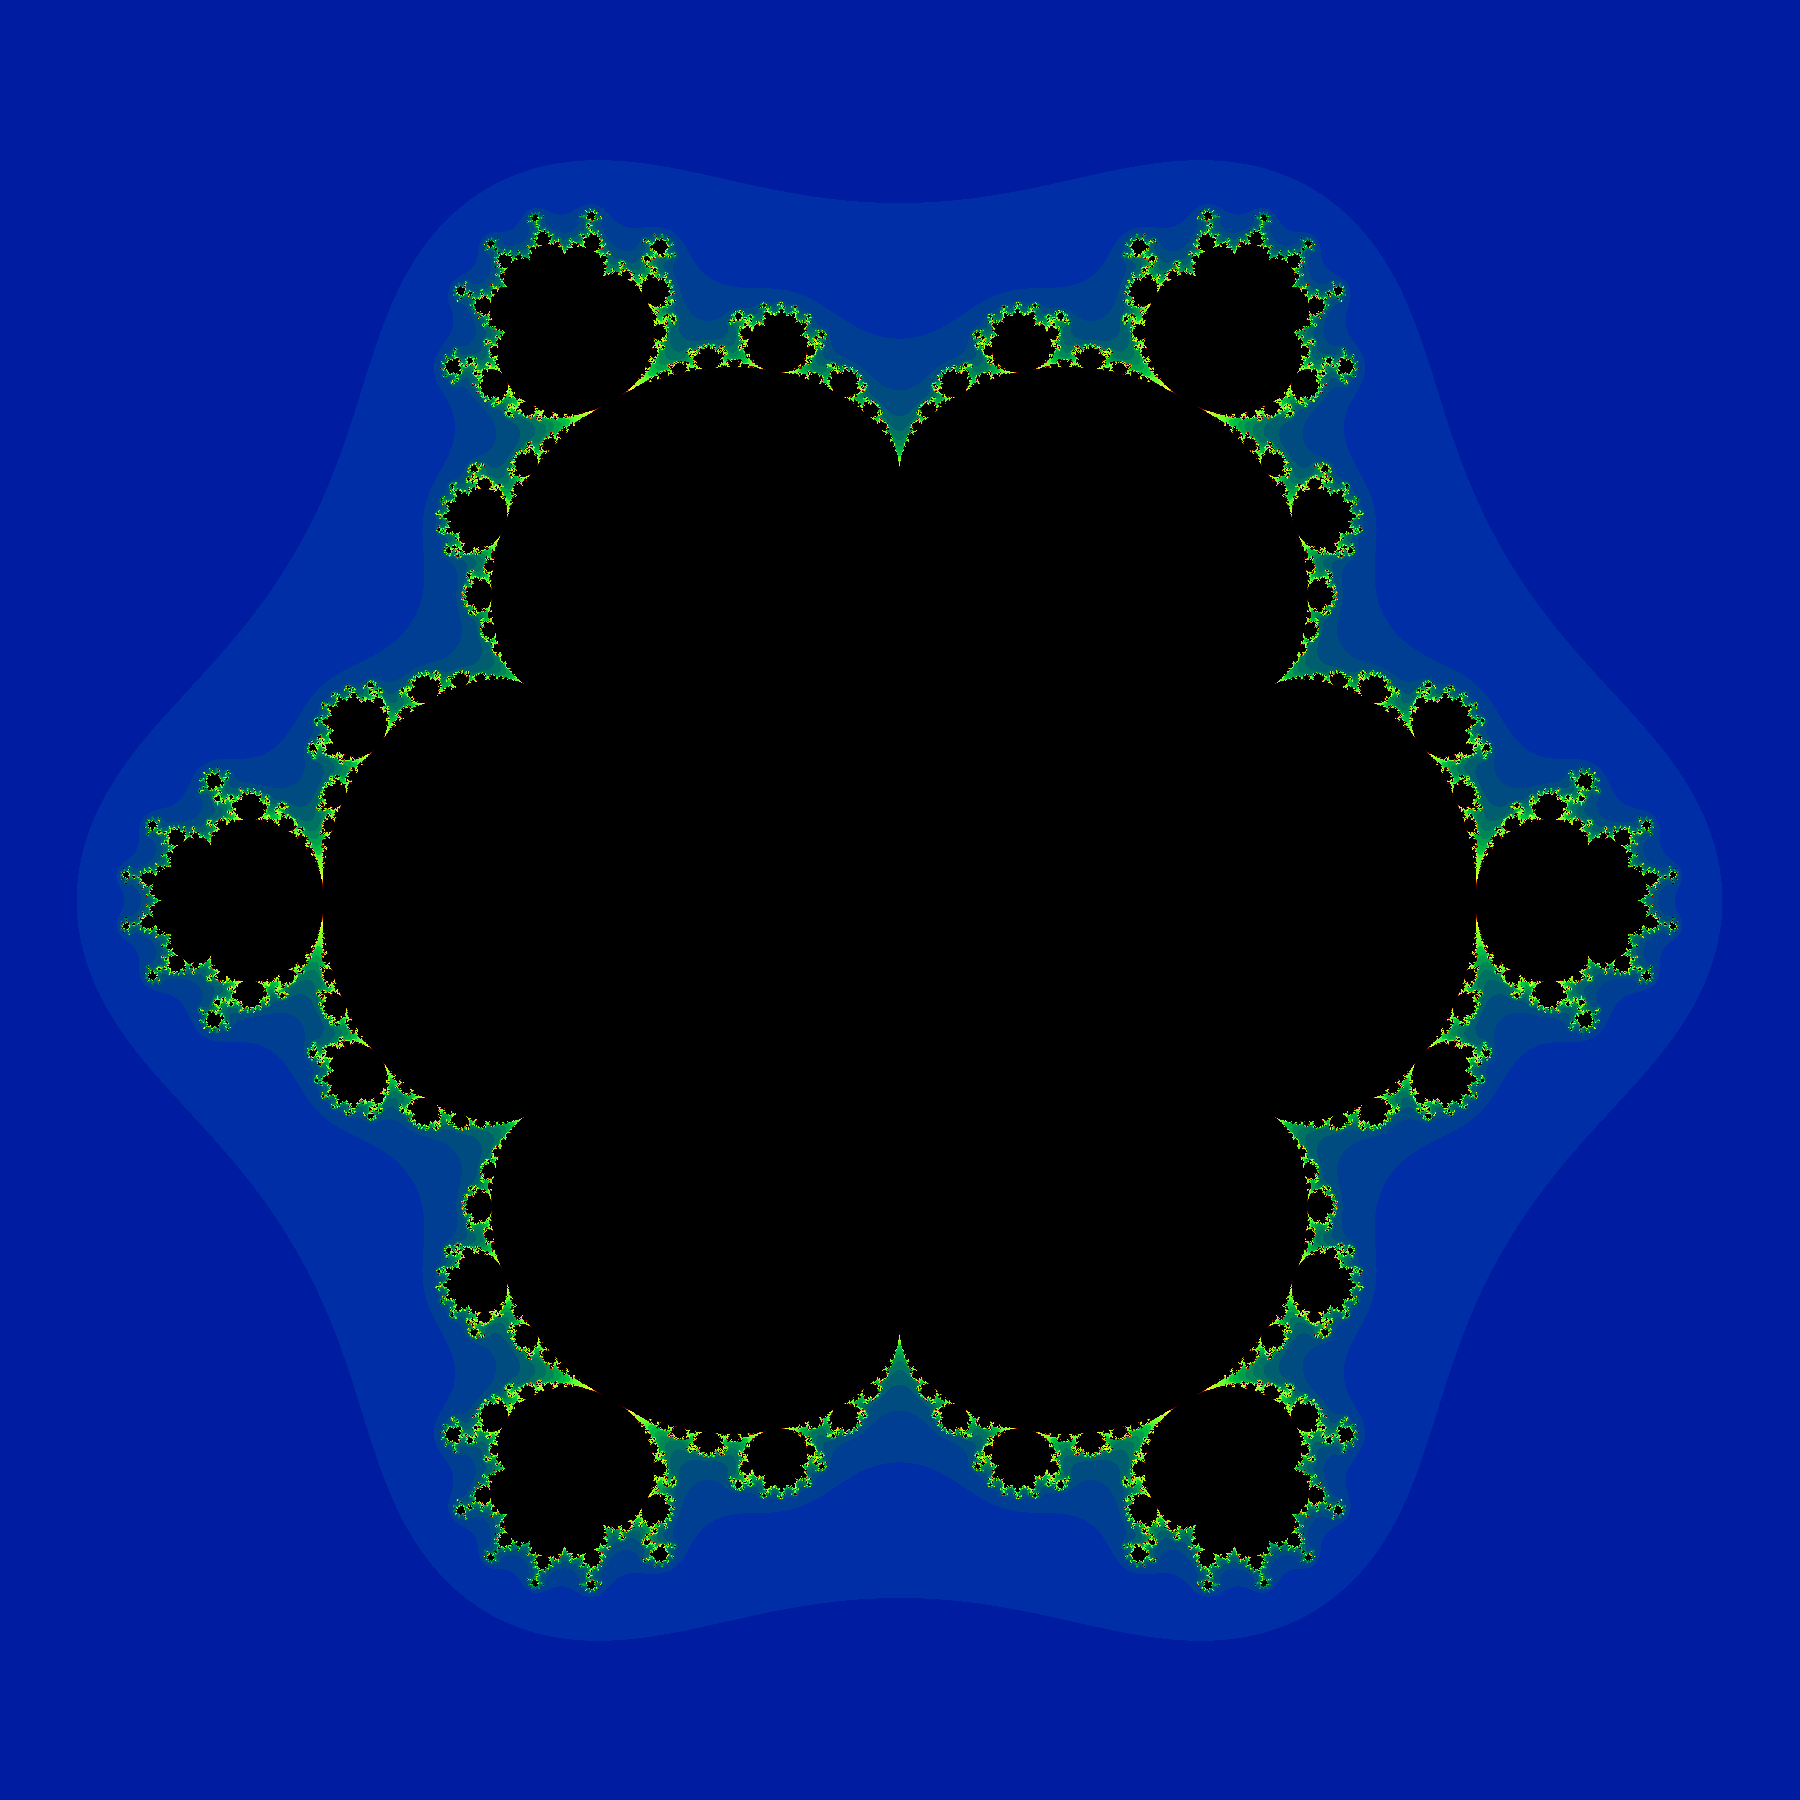 Higher-power 'z^n' counterparts of the Julia and Mandelbrot Set fractals